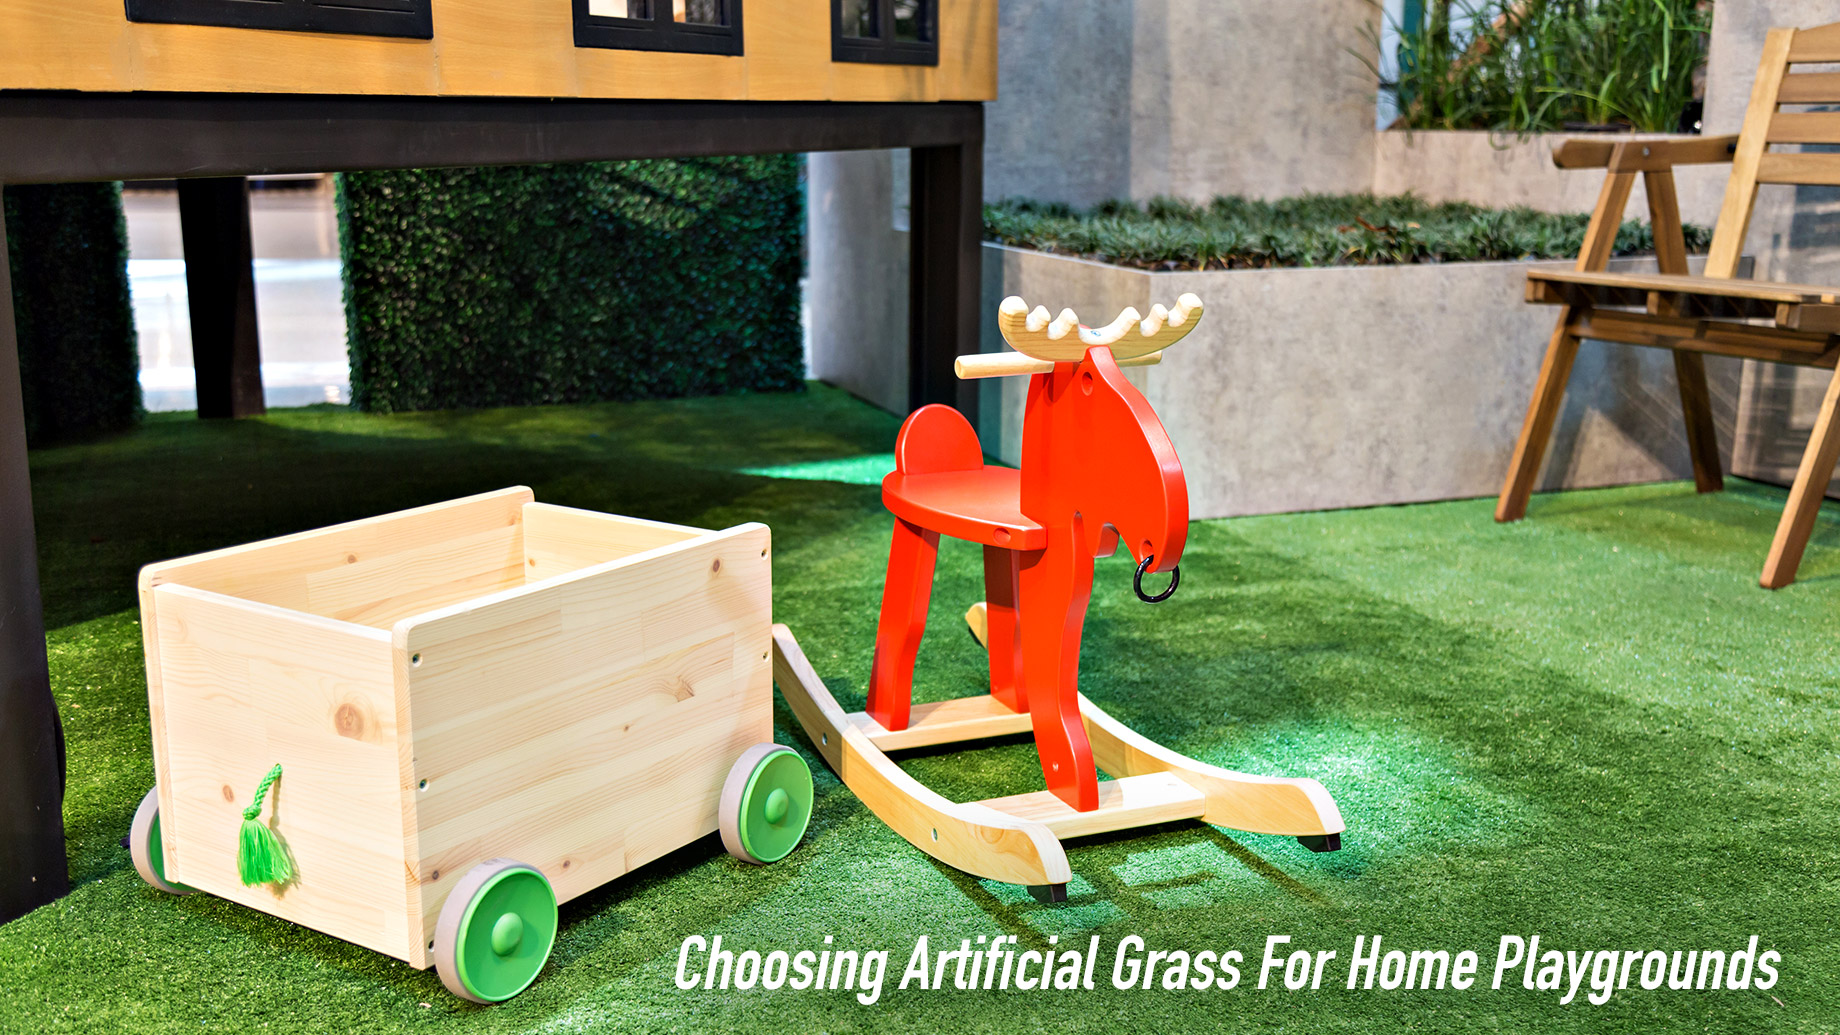 Why Are People Choosing Artificial Grass For Home Playgrounds?